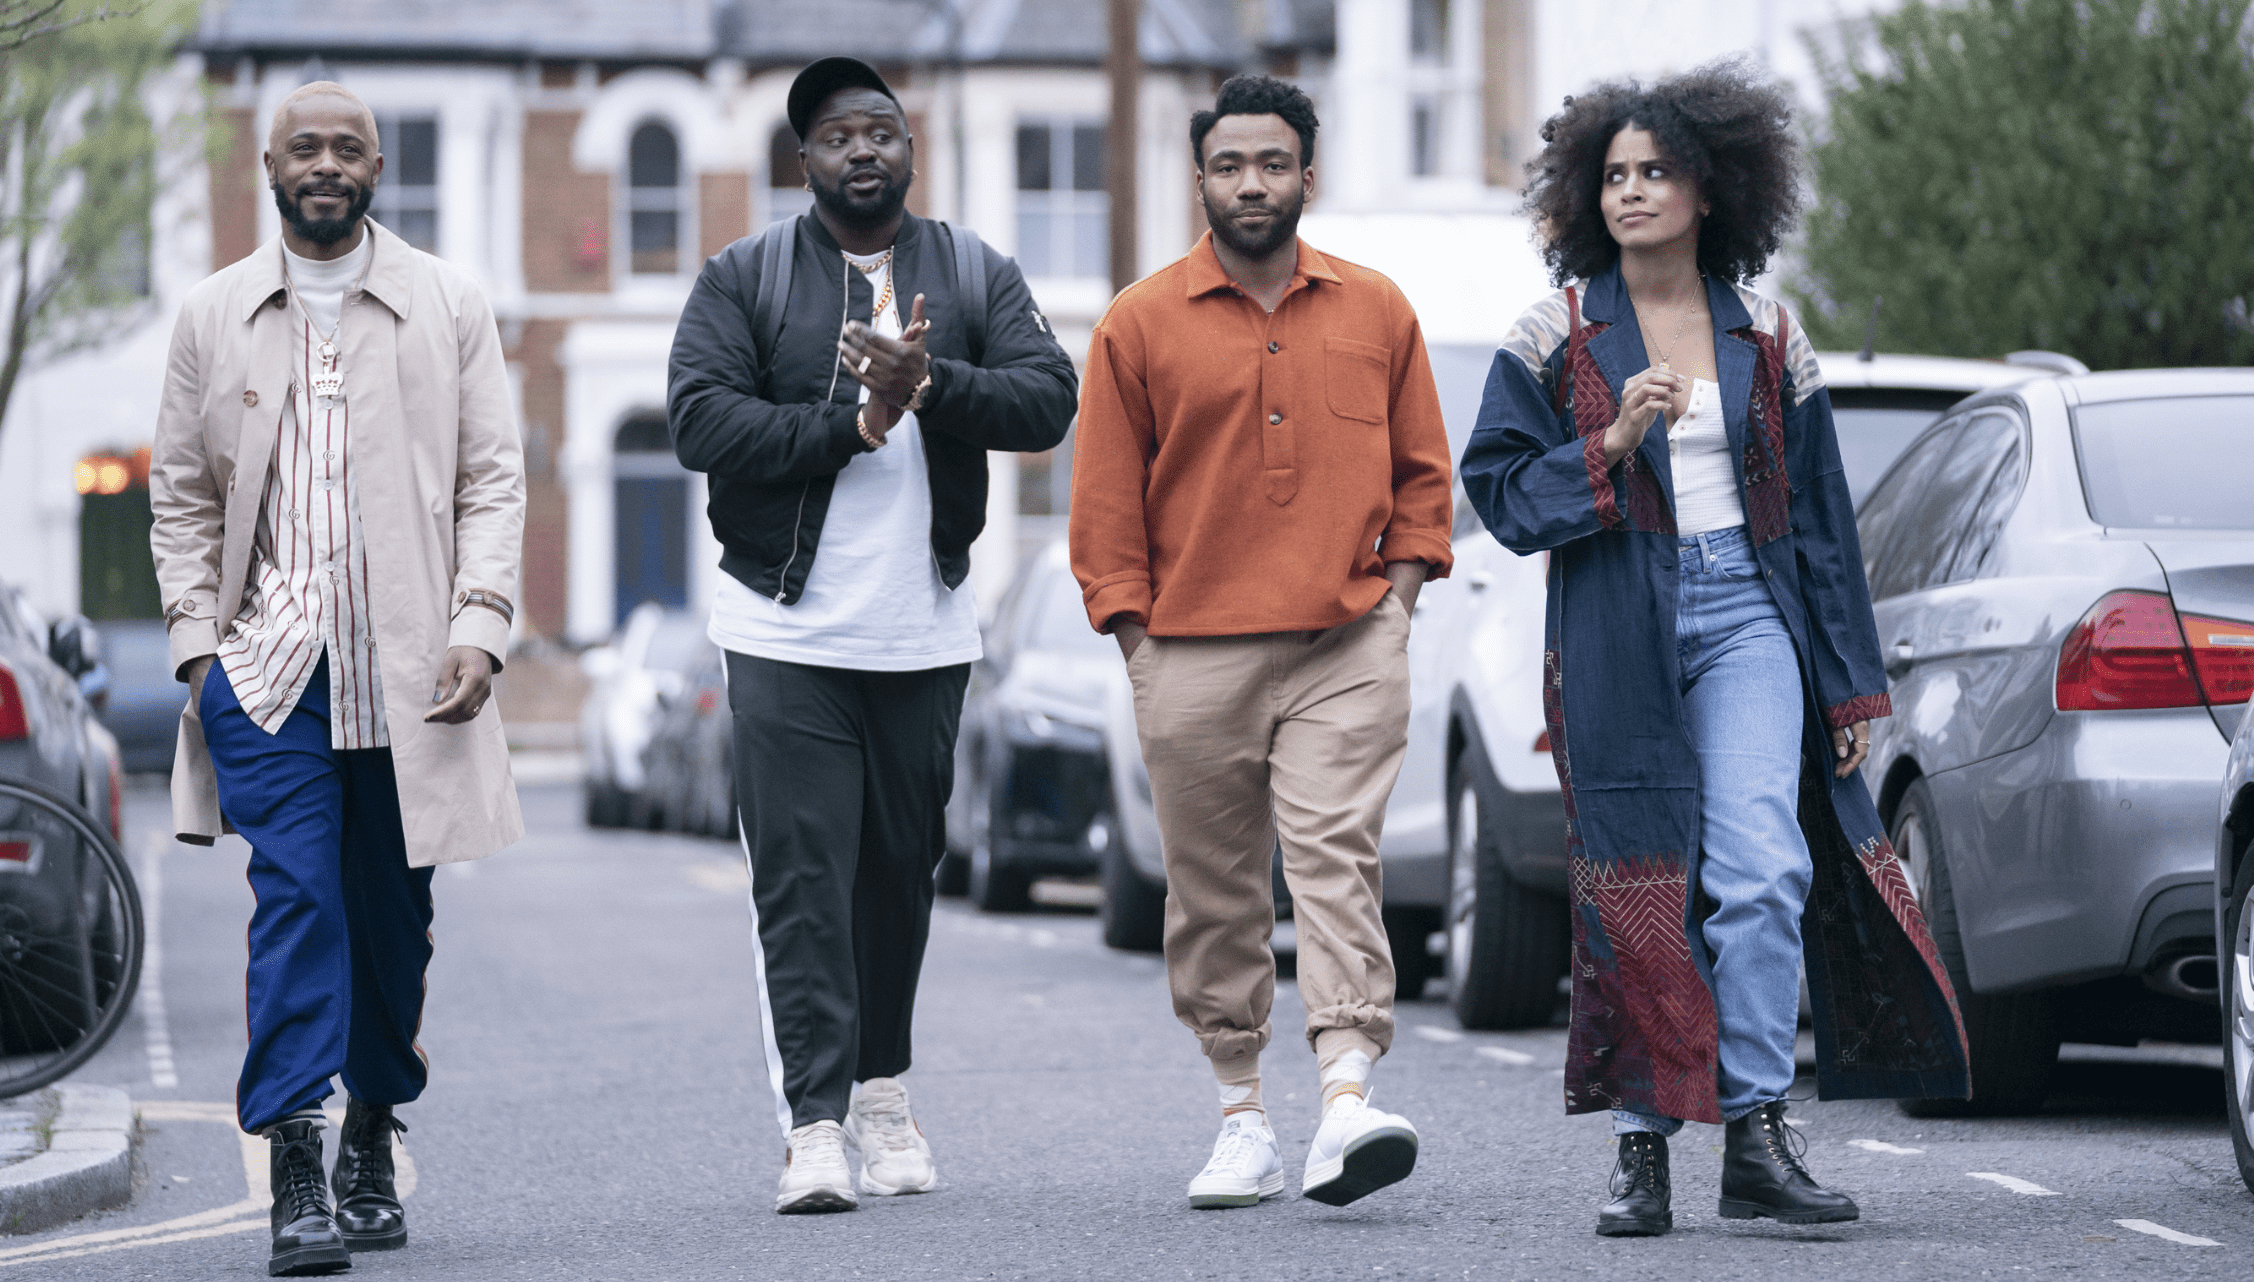 The four main characters of the show Atlanta walk through a street.